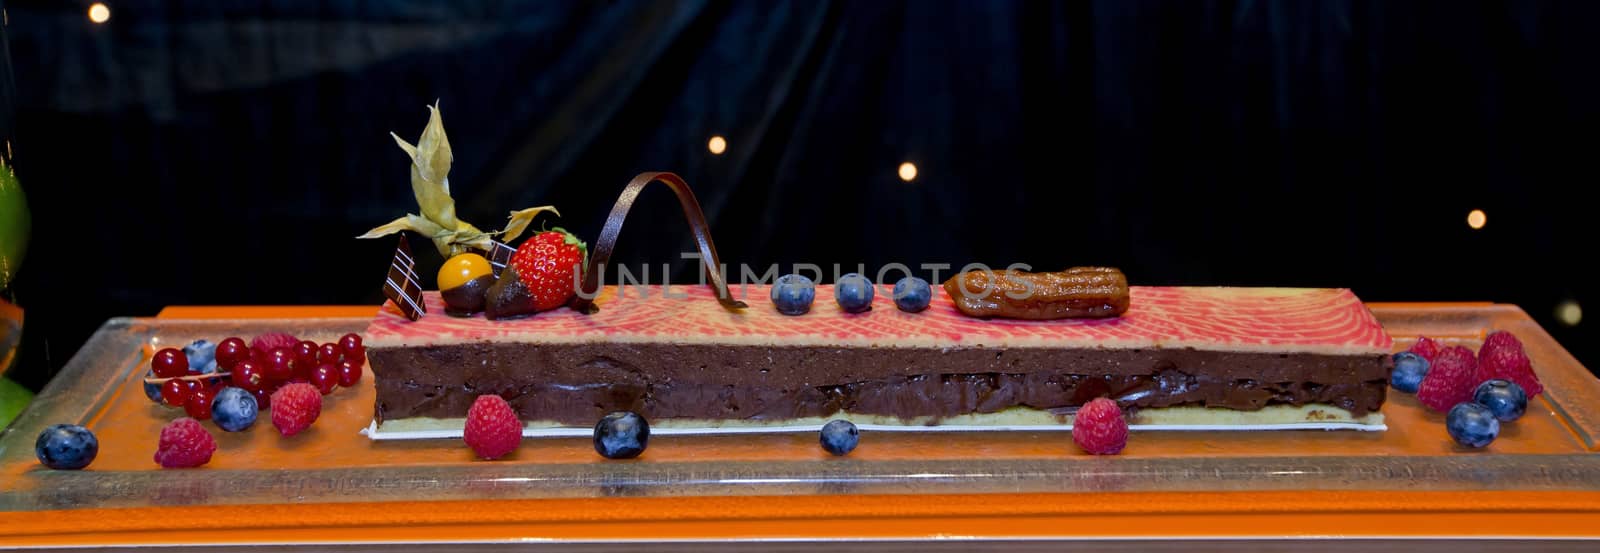 Dark chocolate cake with fresh fruit topping and around display in Party